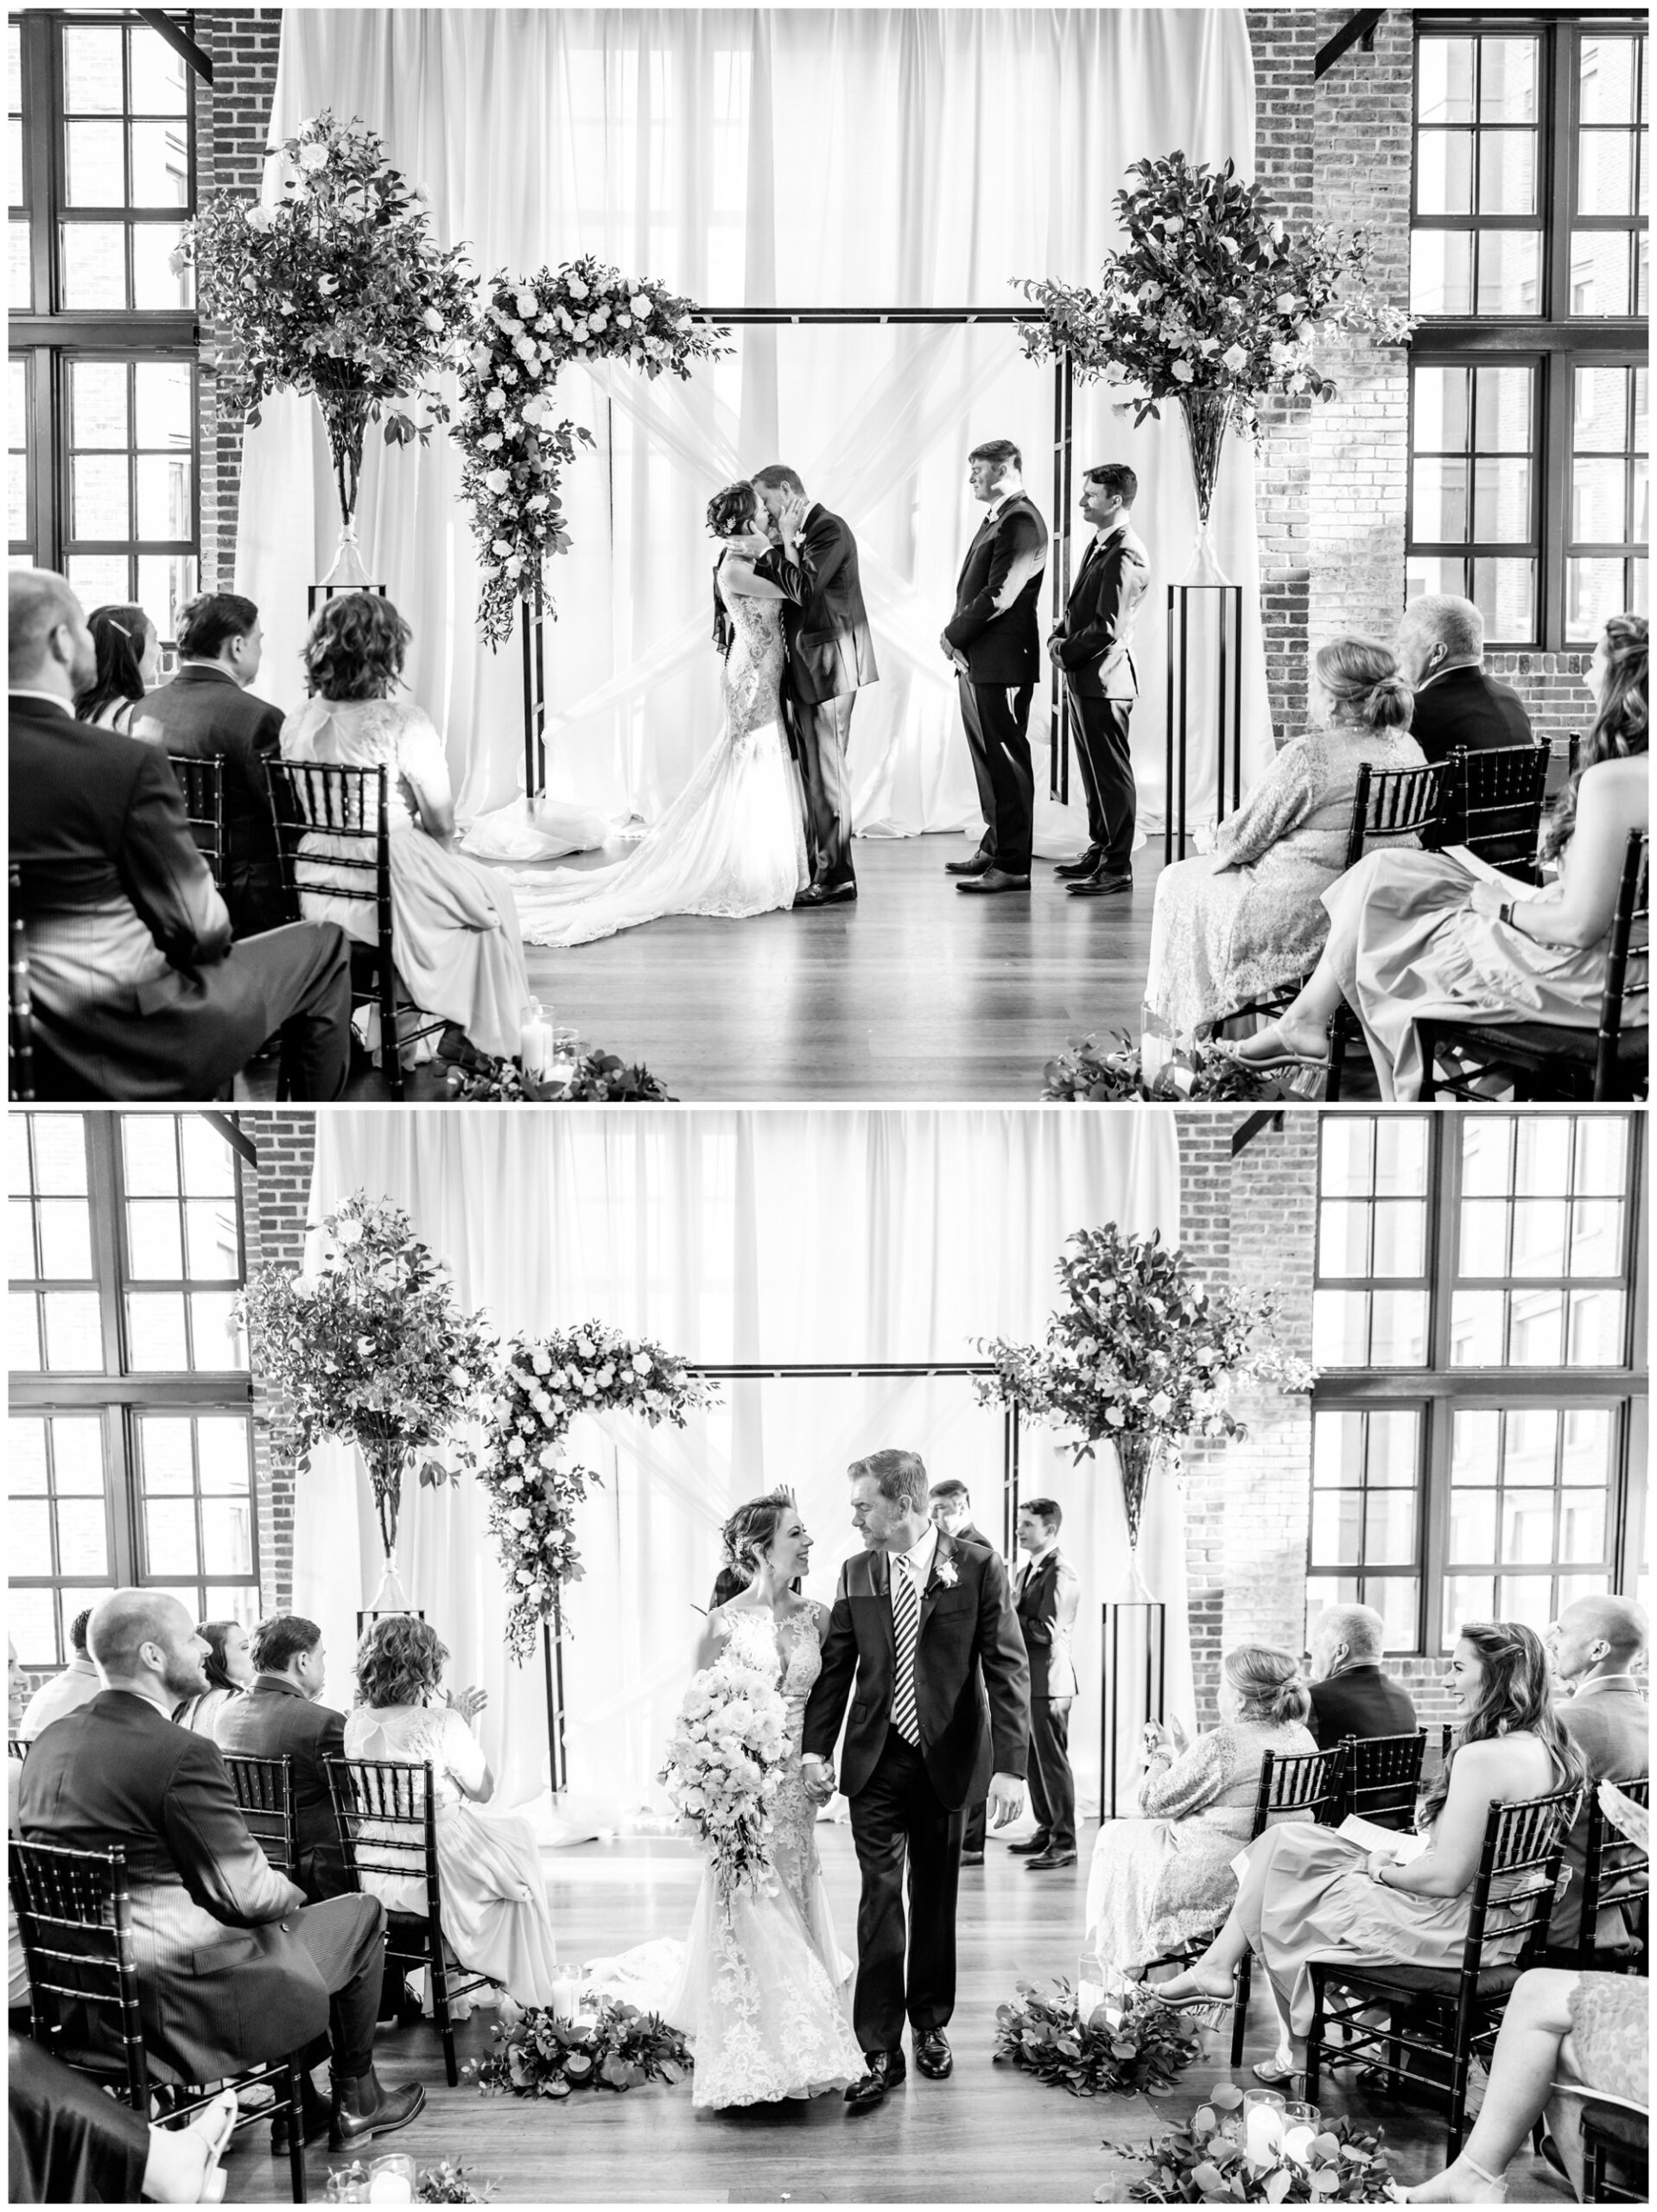 romantic Ritz Carlton Georgetown wedding, summer wedding aesthetic, green and white aesthetic, summer D.C. wedding, D.C. wedding venues, Ritz Carlton wedding, Washington D.C. wedding, romantic wedding aesthetic, Georgetown wedding, Rachel E.H. Photography, D.C. photographer, black and white, couple kissing at alter, couple walking back down aisle